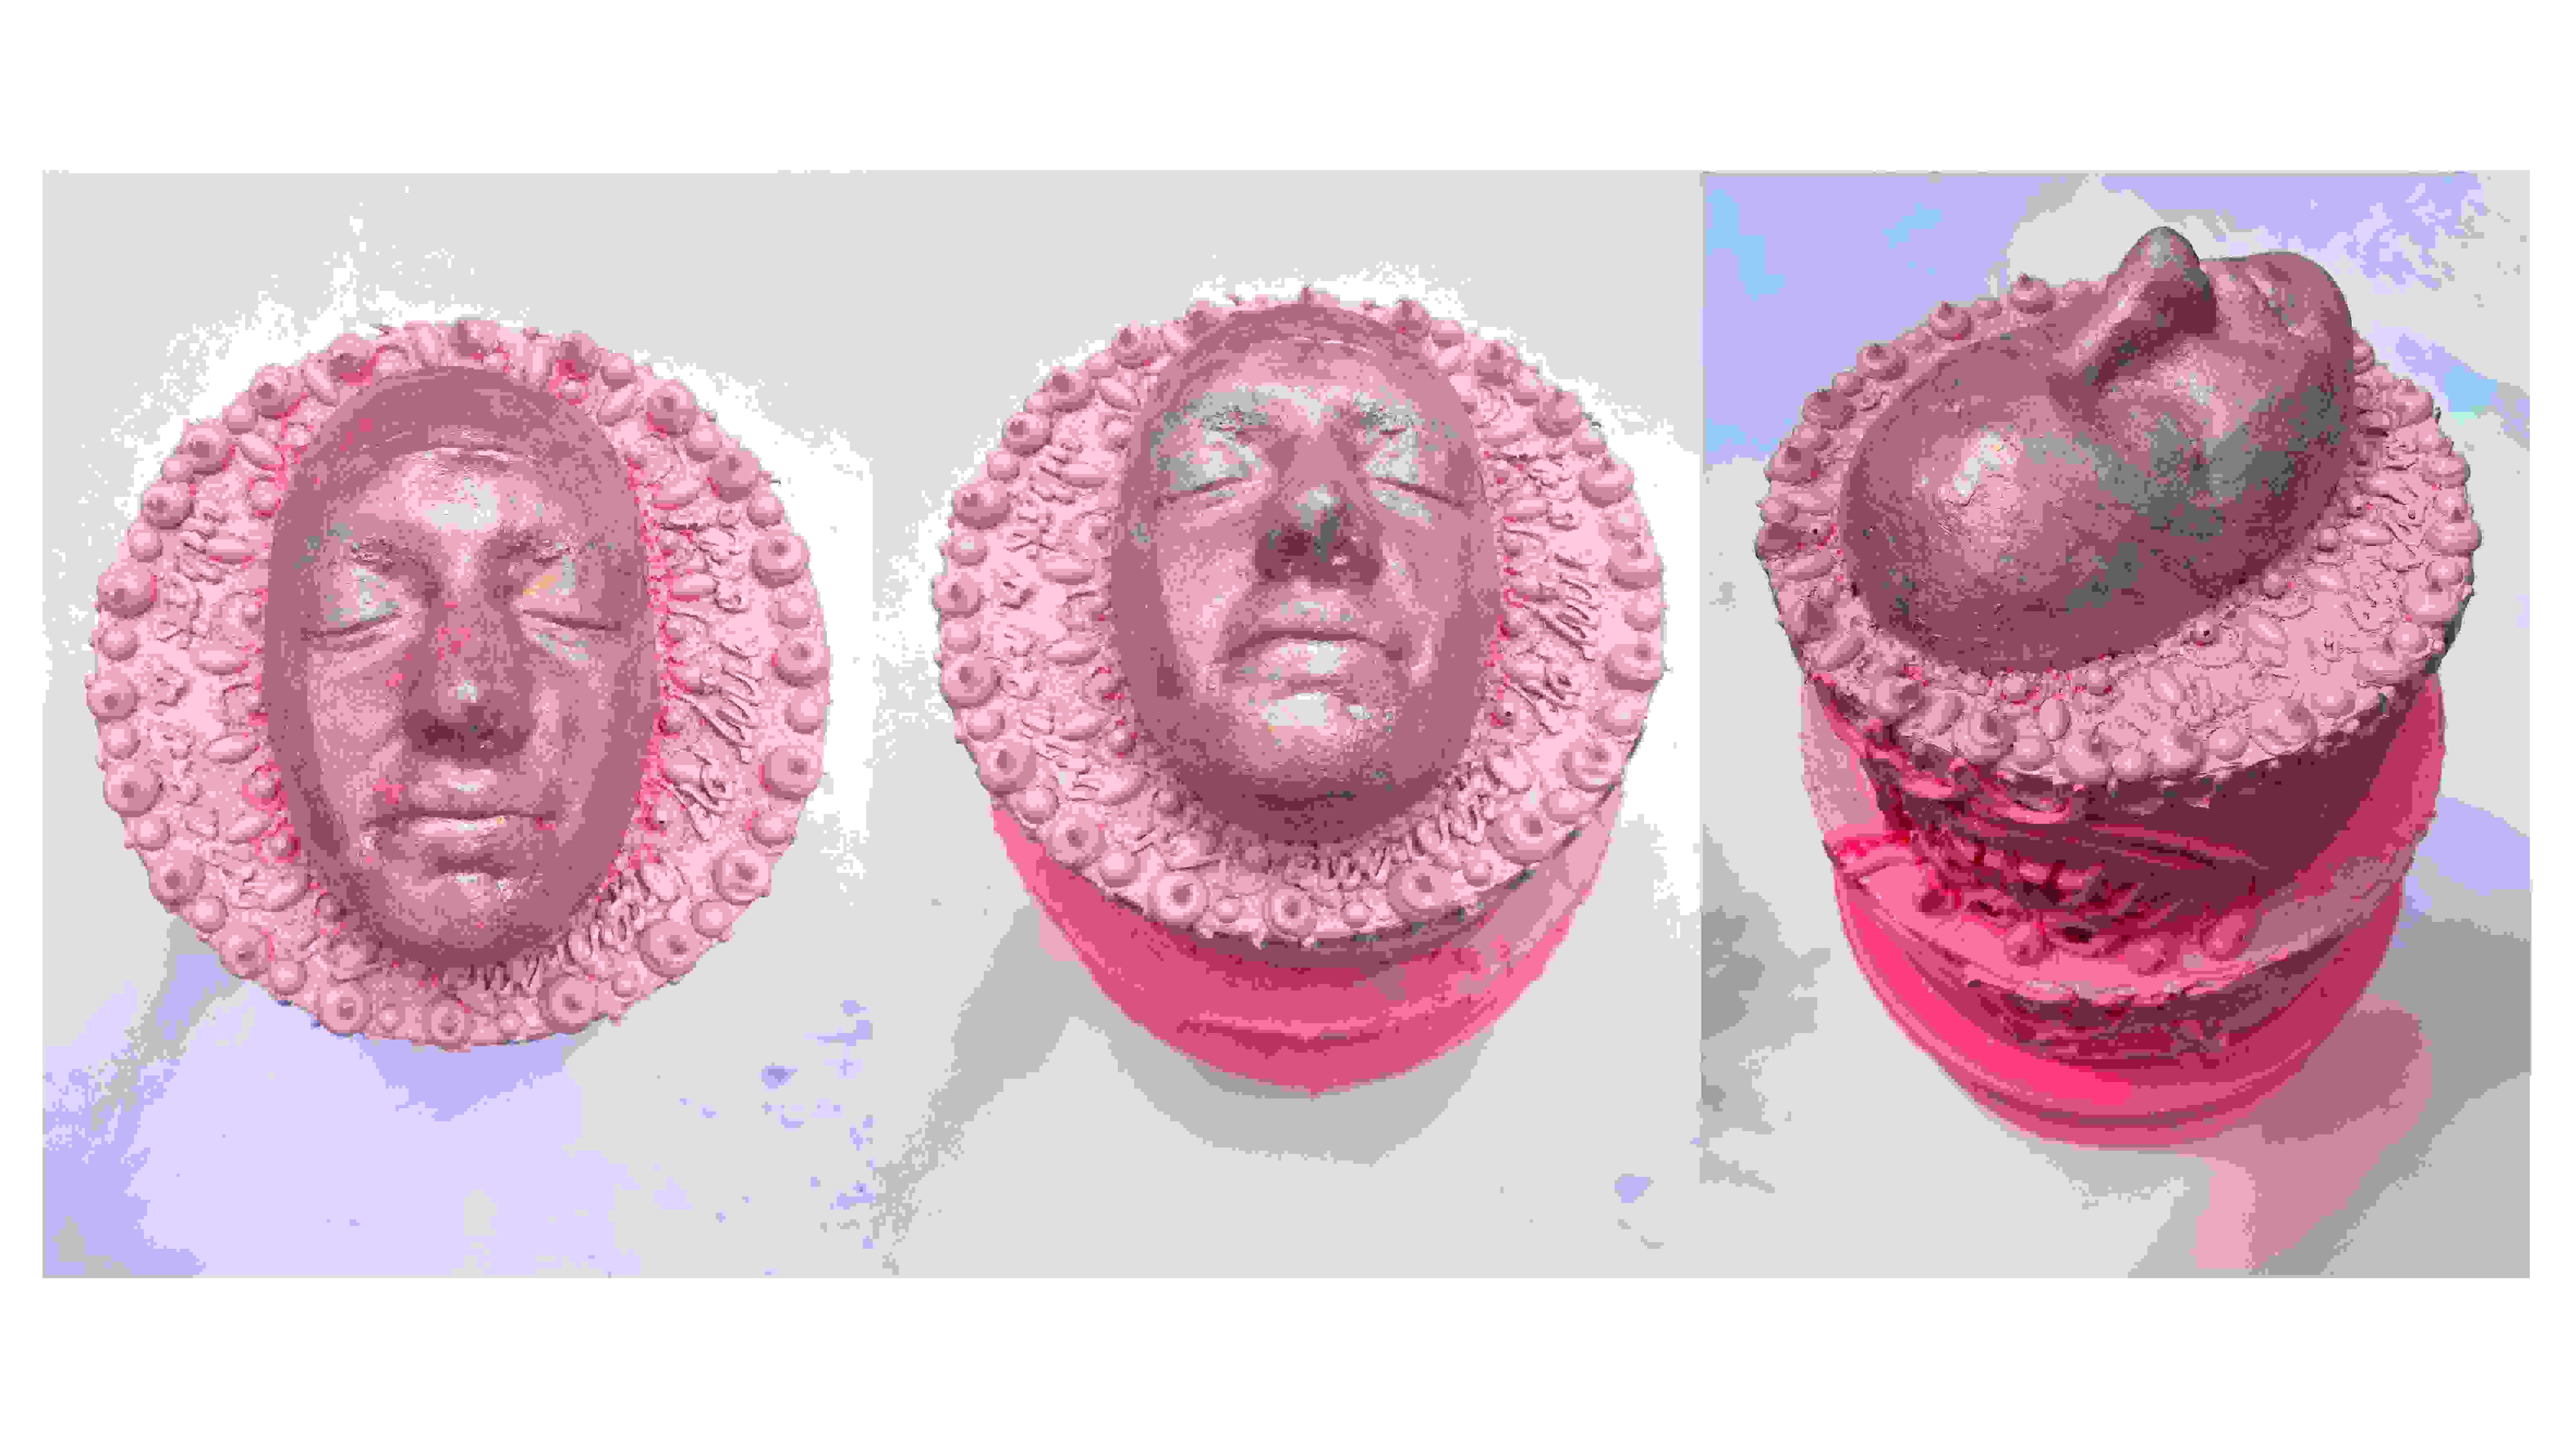 Pink sculpture of a face with decorative elements around the face. 